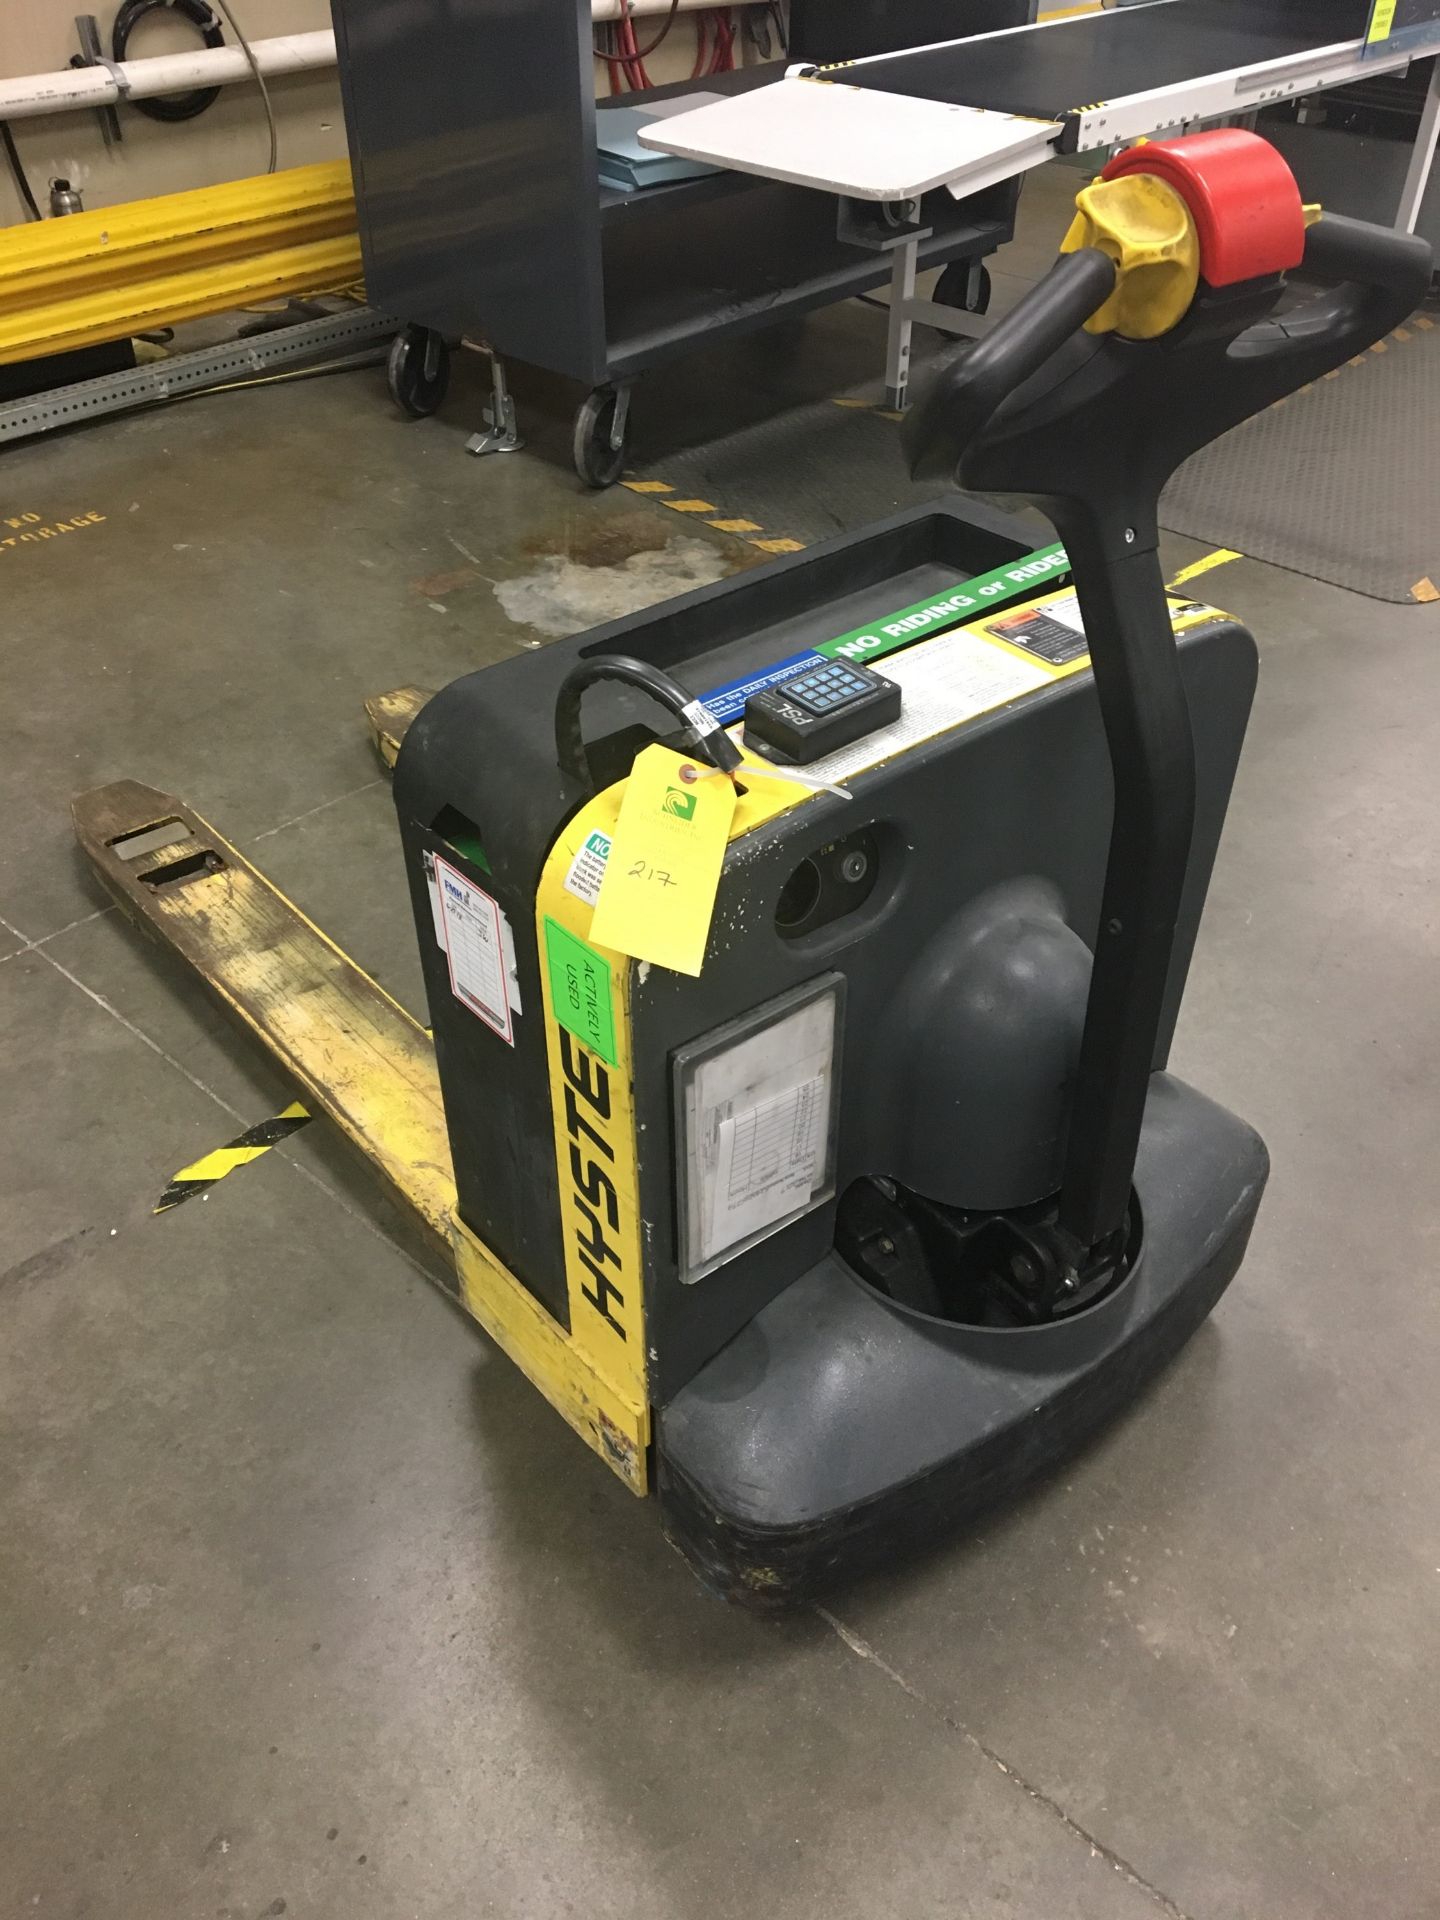 Hyster Electric Pallet Jack, LIC# 2500276, Removal Fee: $20